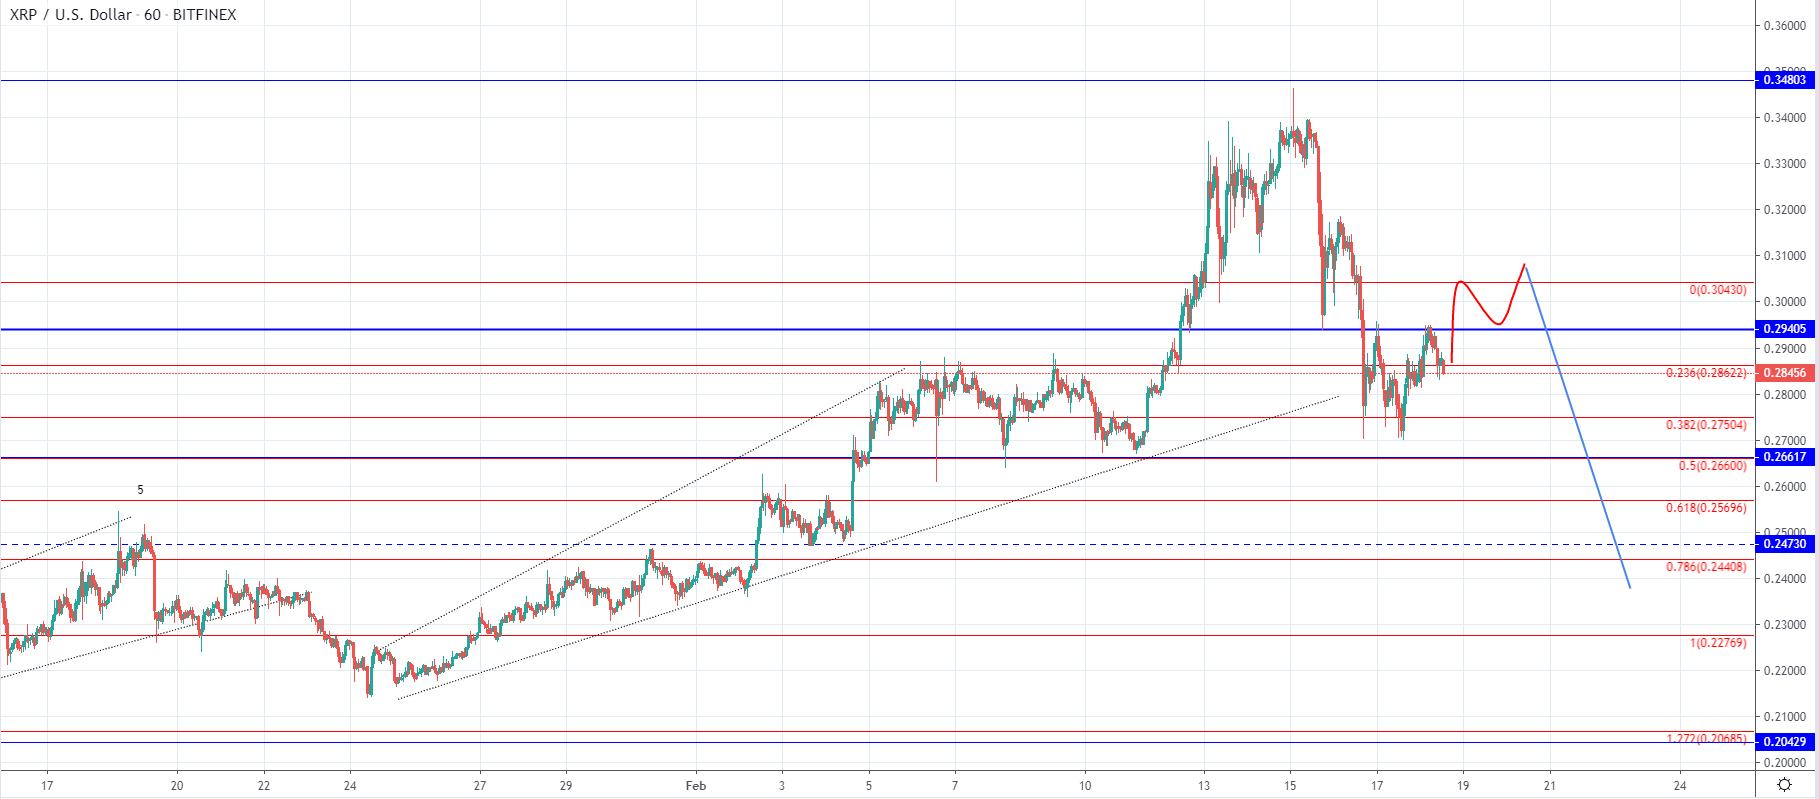 BTC and XRP - Further downside expected